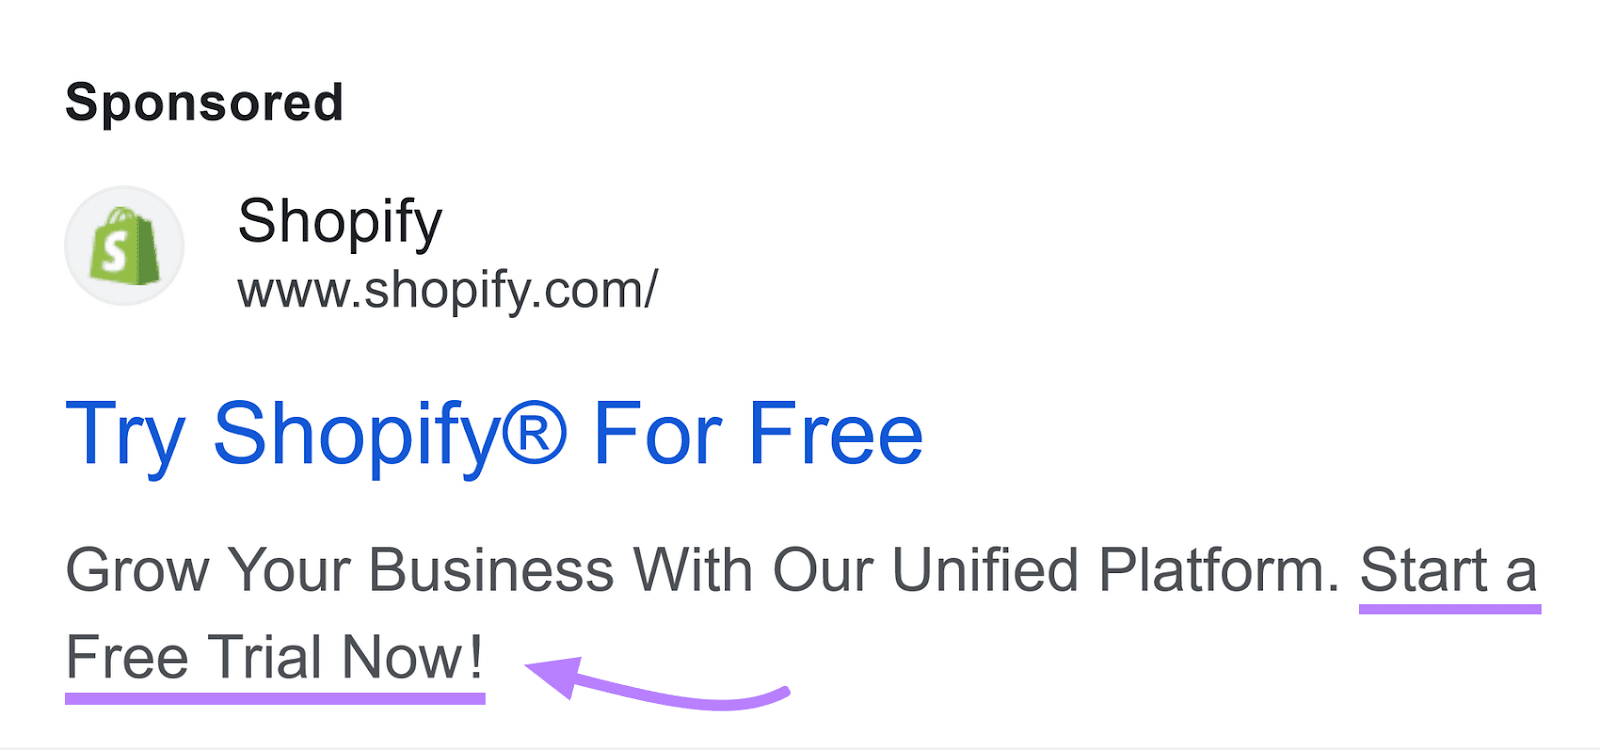 A CTA that reads "Start a Free Trial Now!" highlighted under Shopify's ad